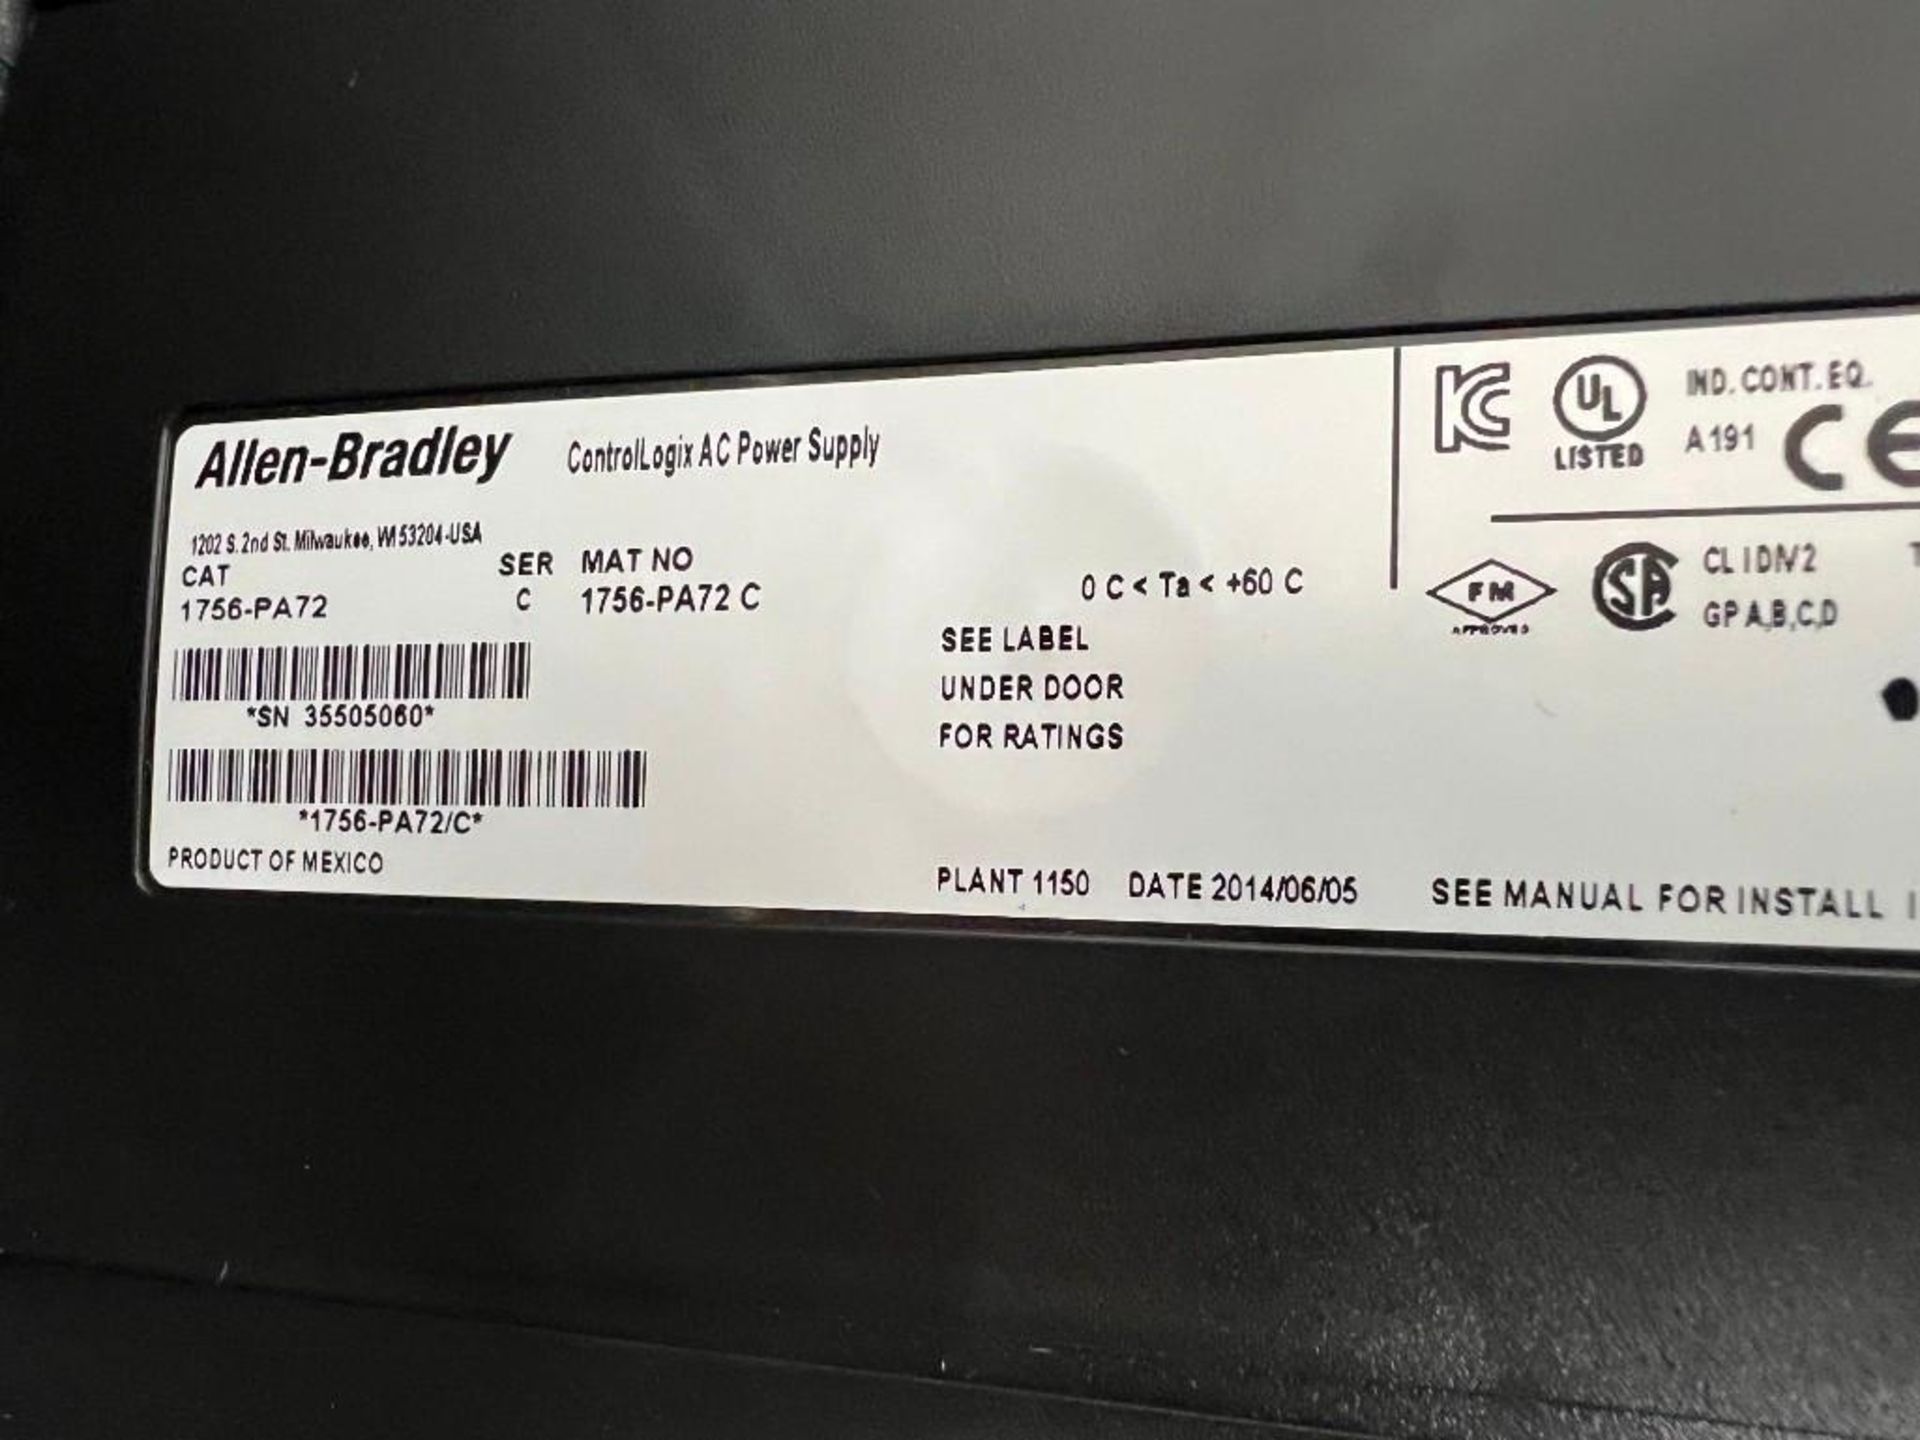 LOT OF NEW ALLEN BRADLEY COMPONENTS WITHOUT ORIGINAL PACKAGING (1756-PA72, 1791-16BC, 802M-XTY16, 42 - Image 2 of 8